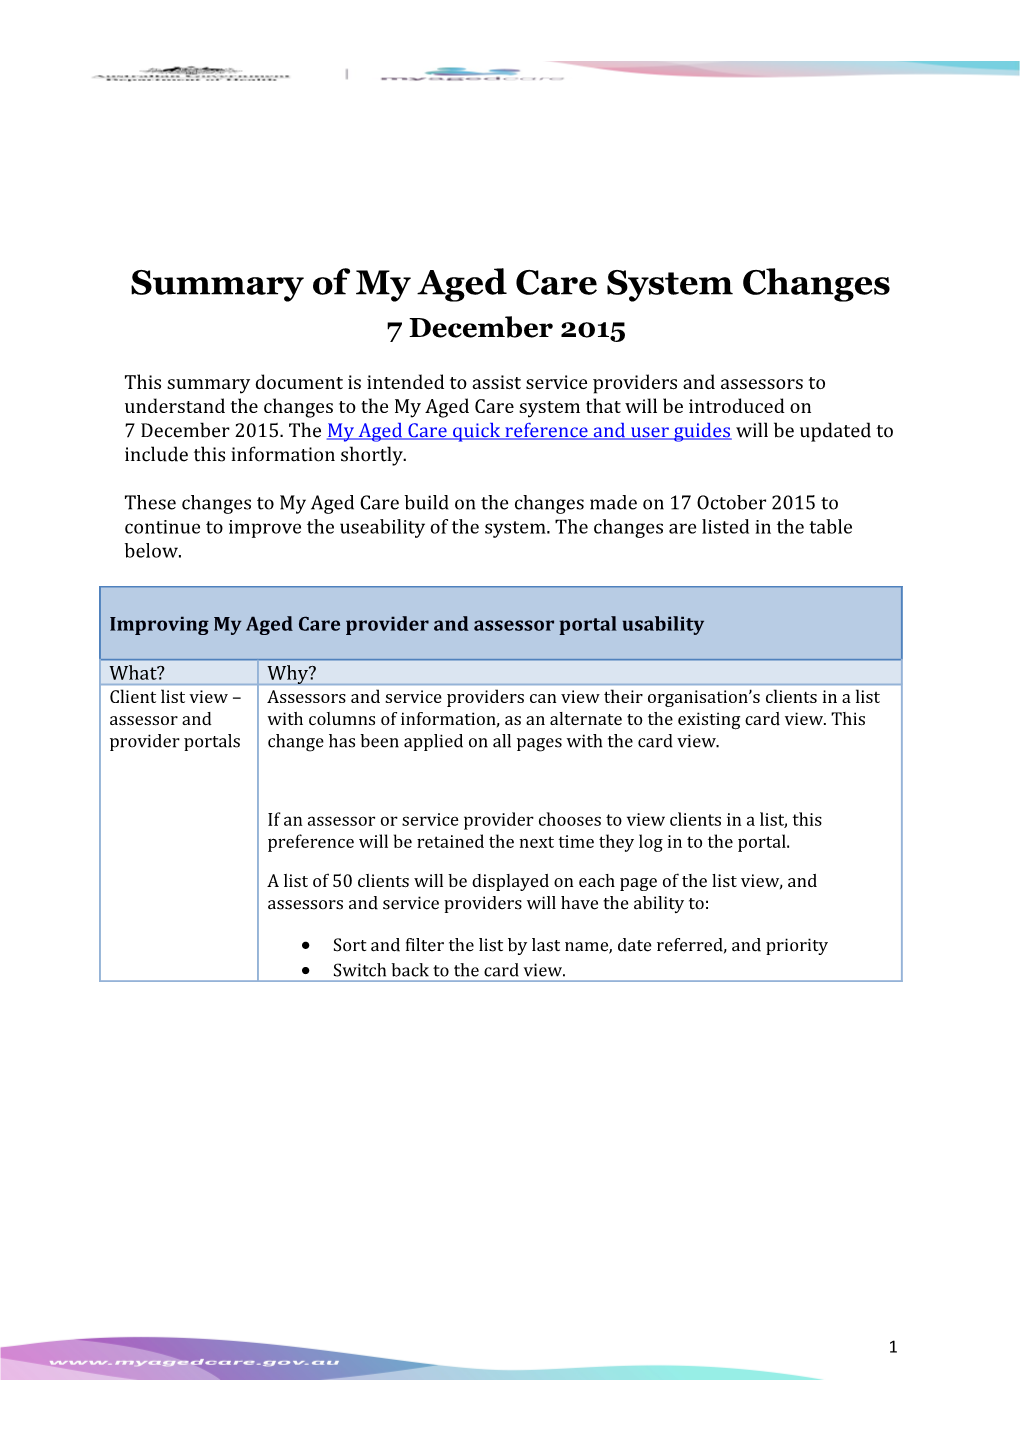 Summary of My Aged Care System Changes 7 December 2015